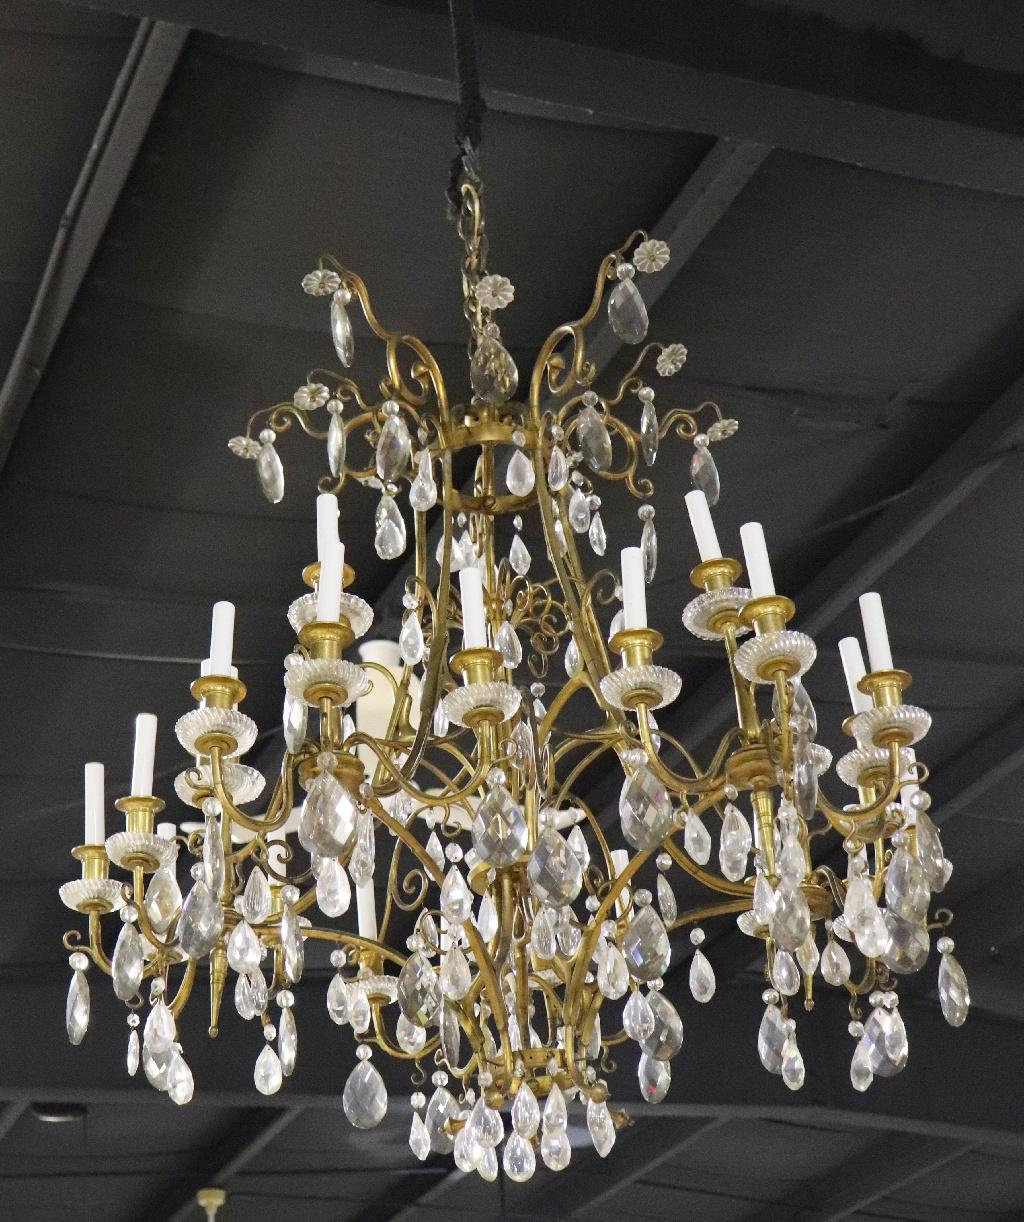 Early 20th Century Fantastic Russian Neoclassical Dore' Gilt Rock Crystal and Crystal Chandelier For Sale